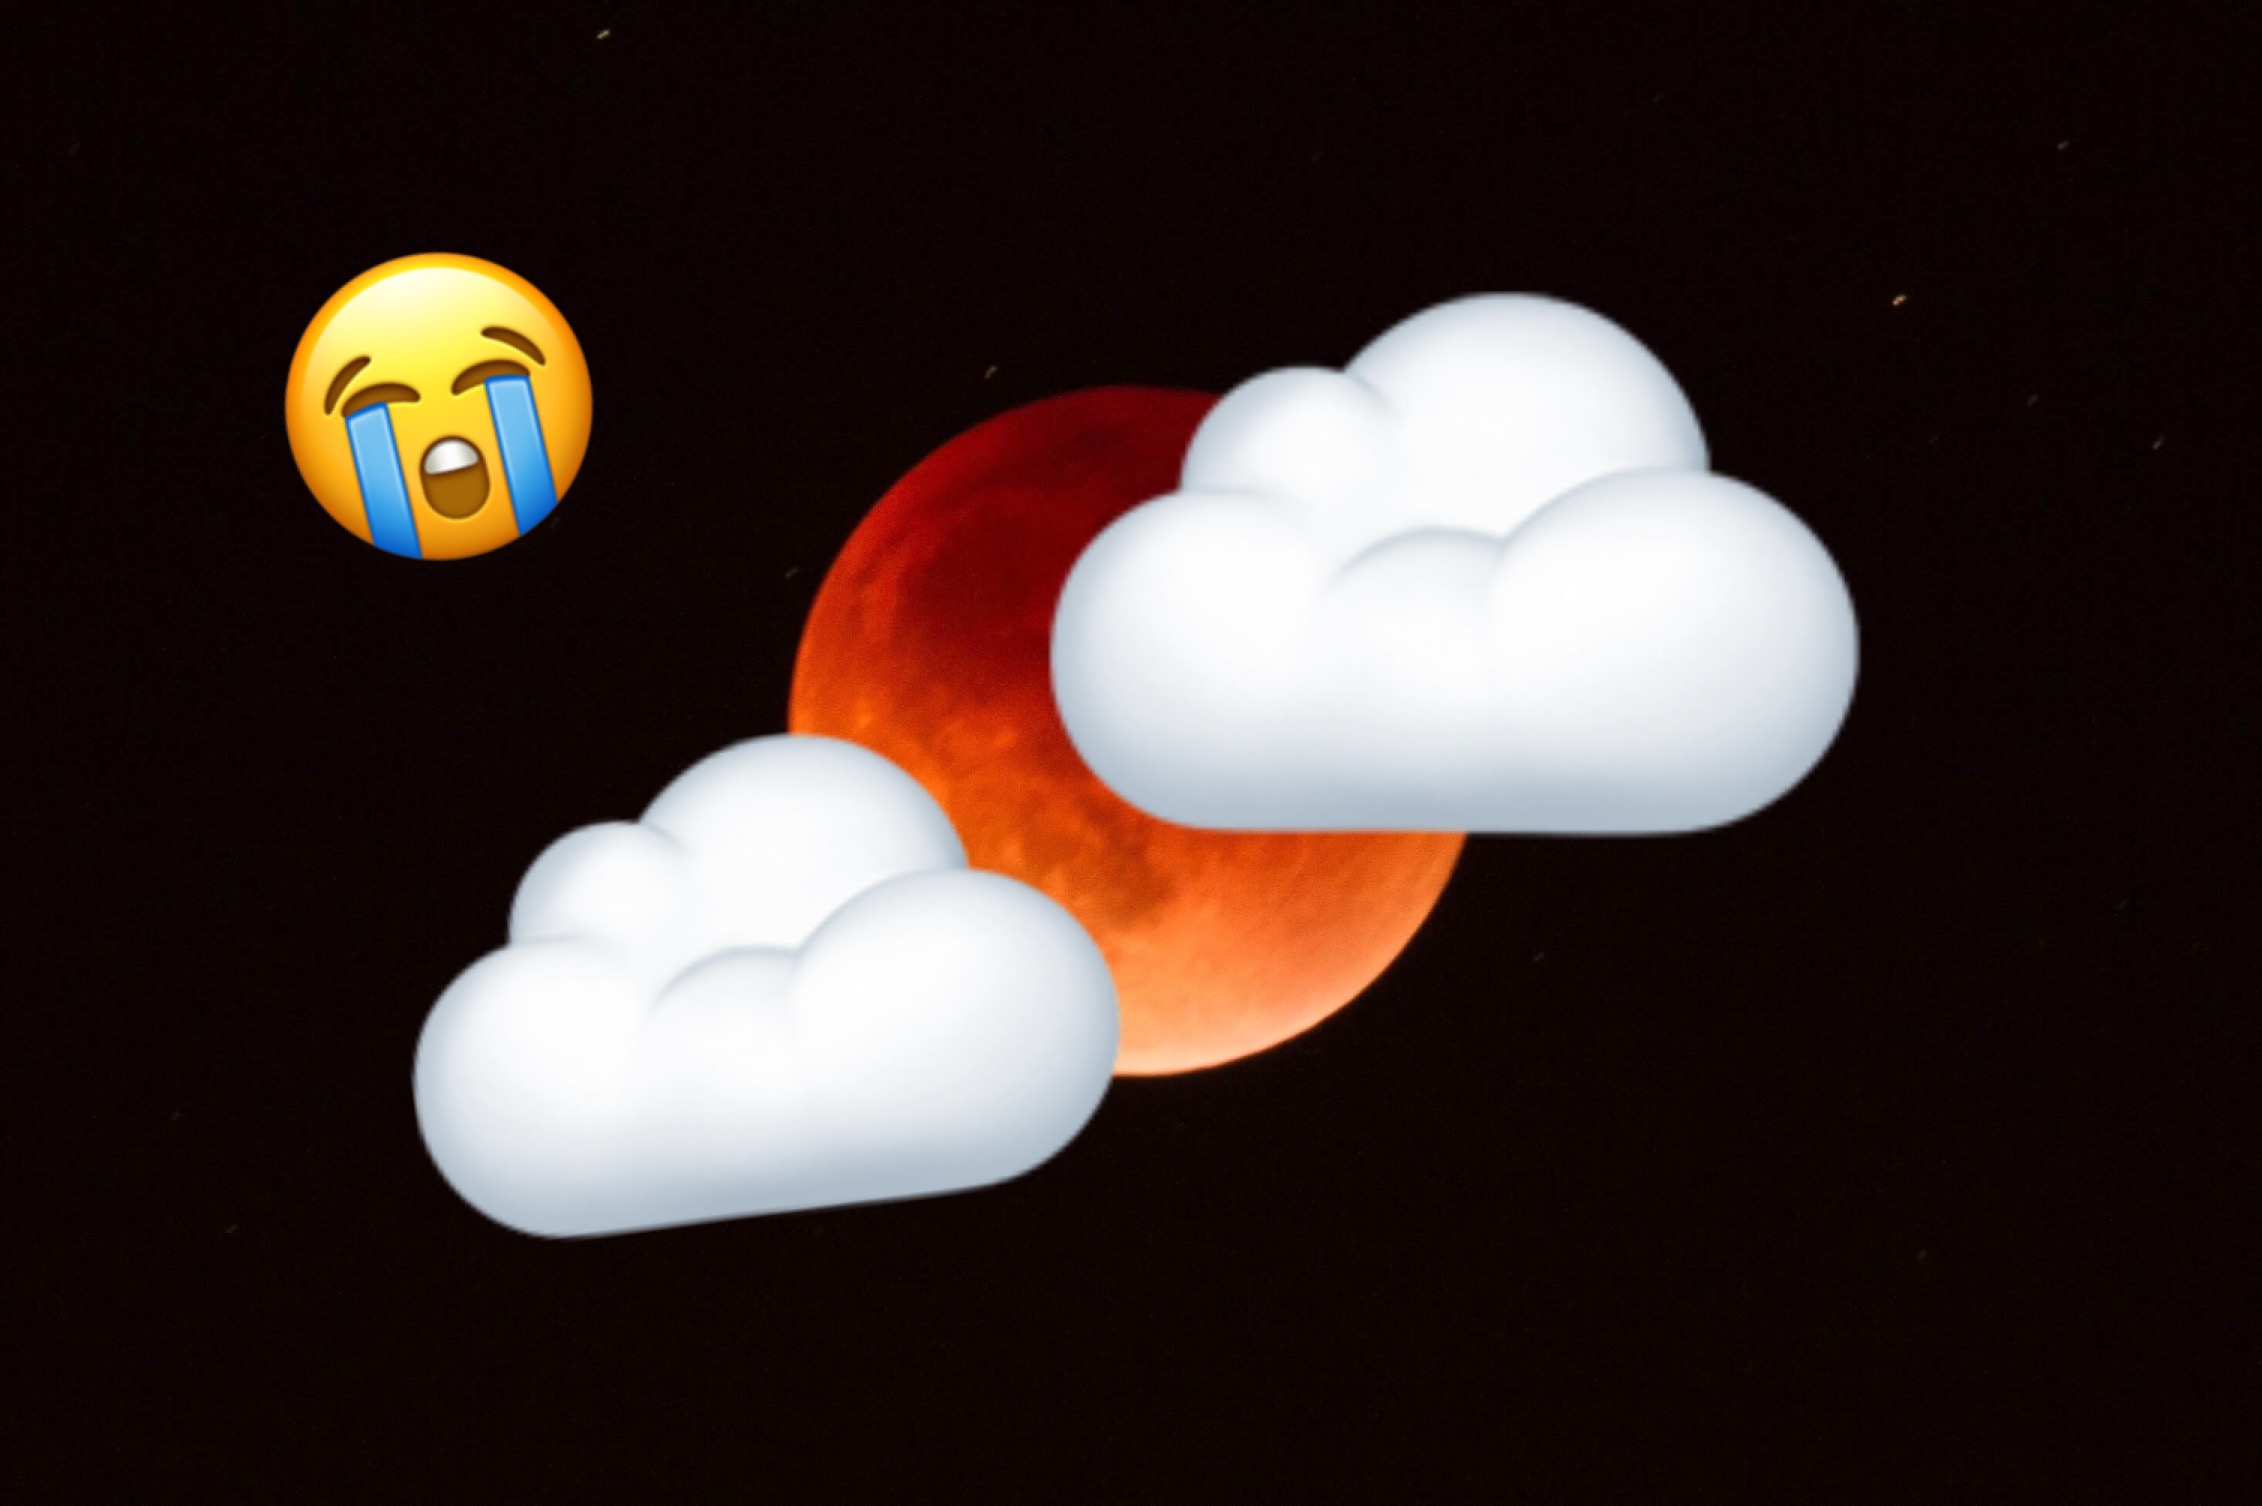 Thank you rainy season for floods, landslides, and not letting us see the Super Blue Blood Moon.